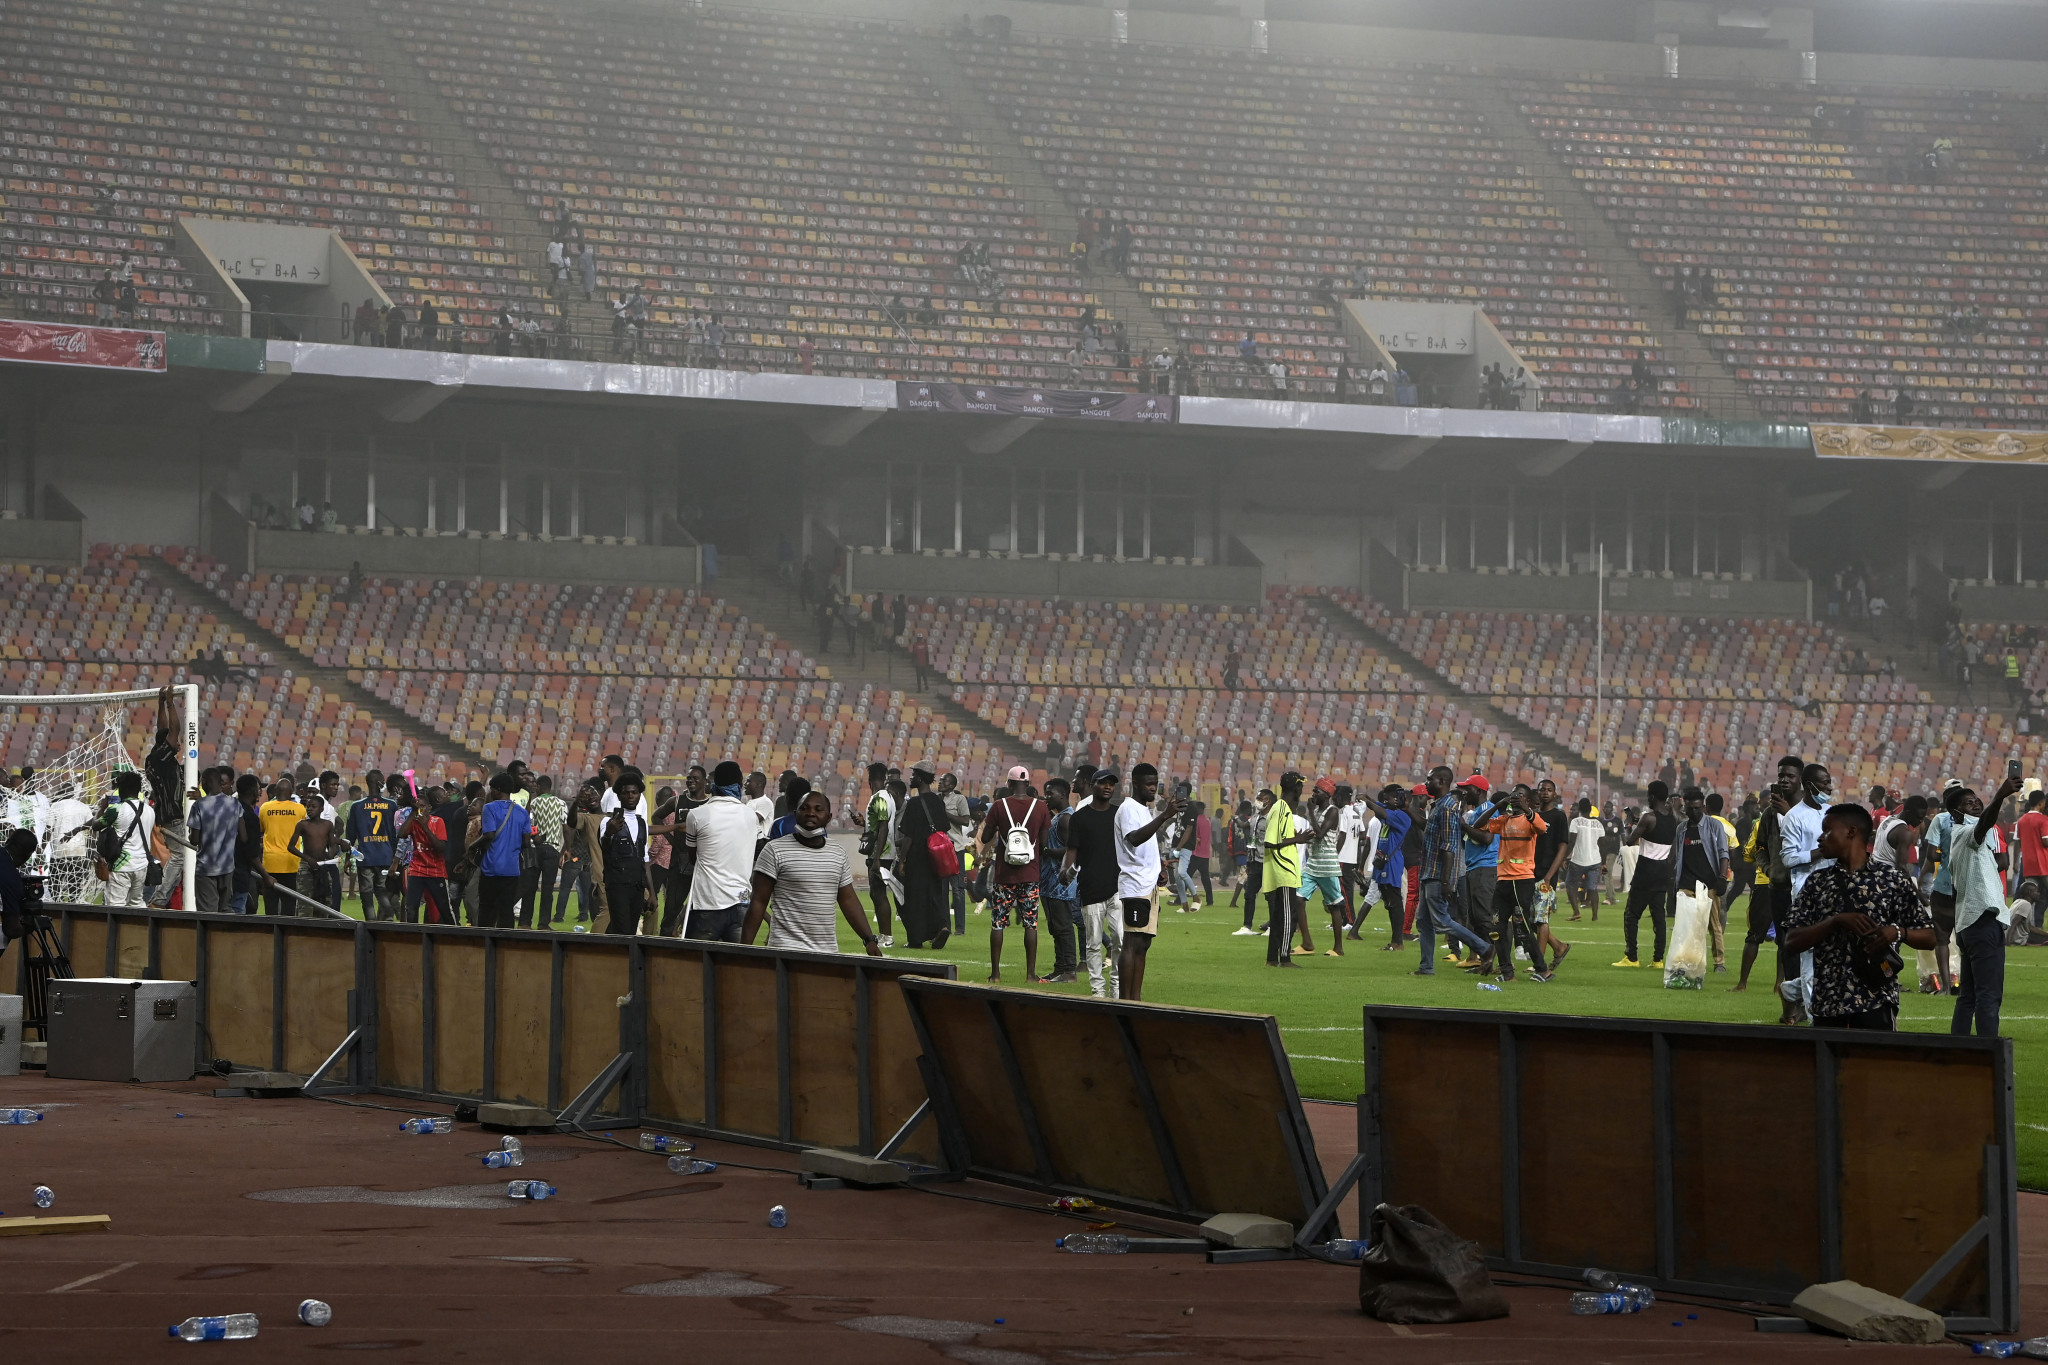 Nigeria denies claims of stadium ban after crowd trouble at FIFA World Cup playoff